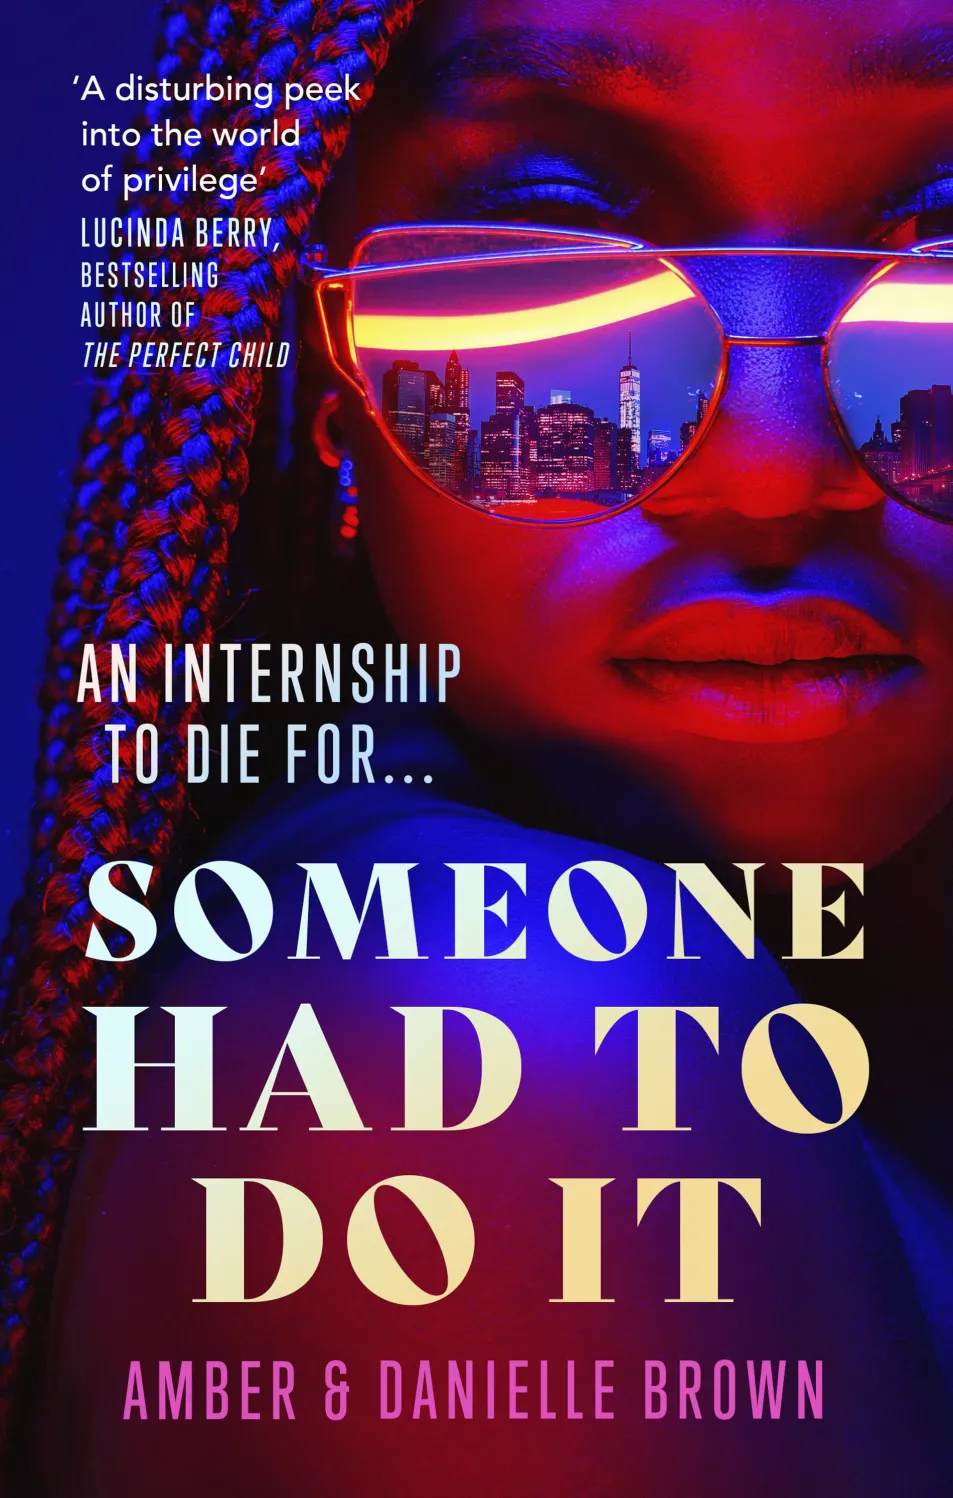 Someone Had To Do It by Danielle & Amber Brown